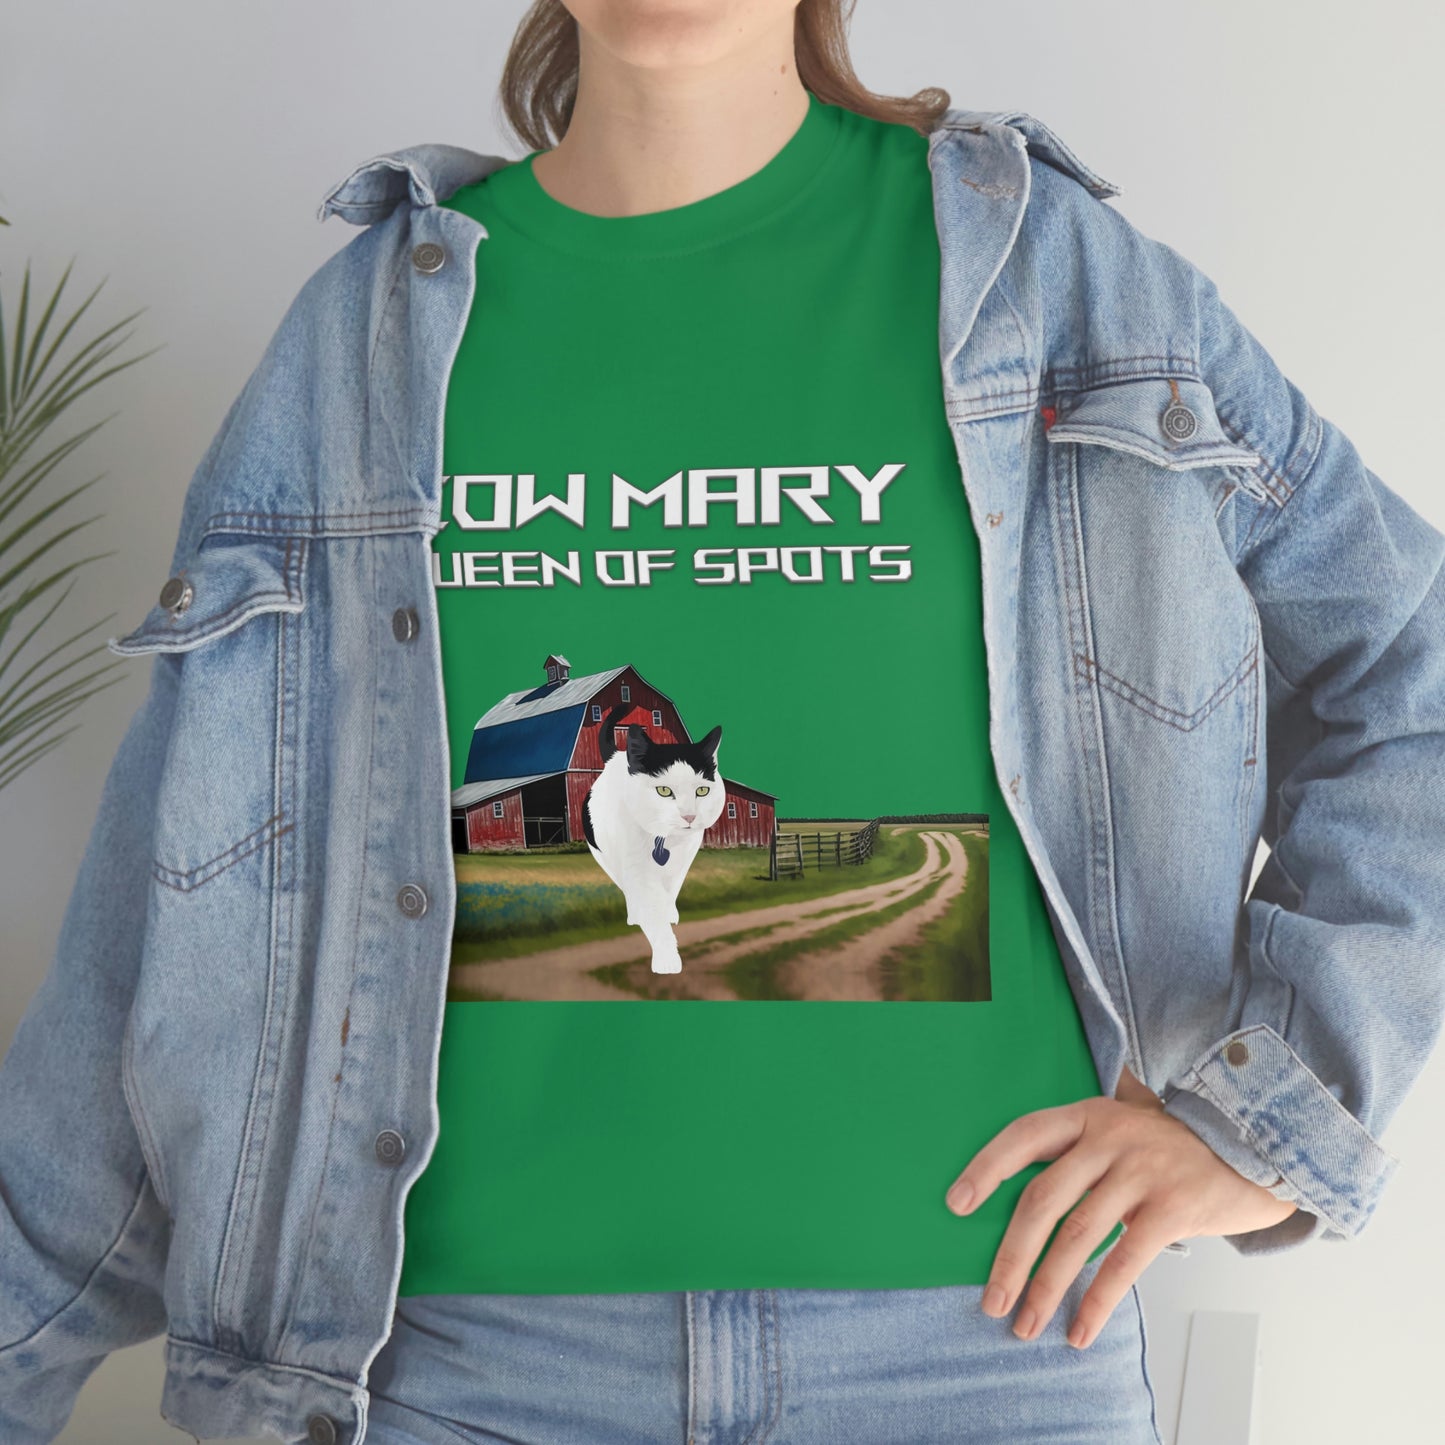 Cow Mary Queen Of Spots Tee